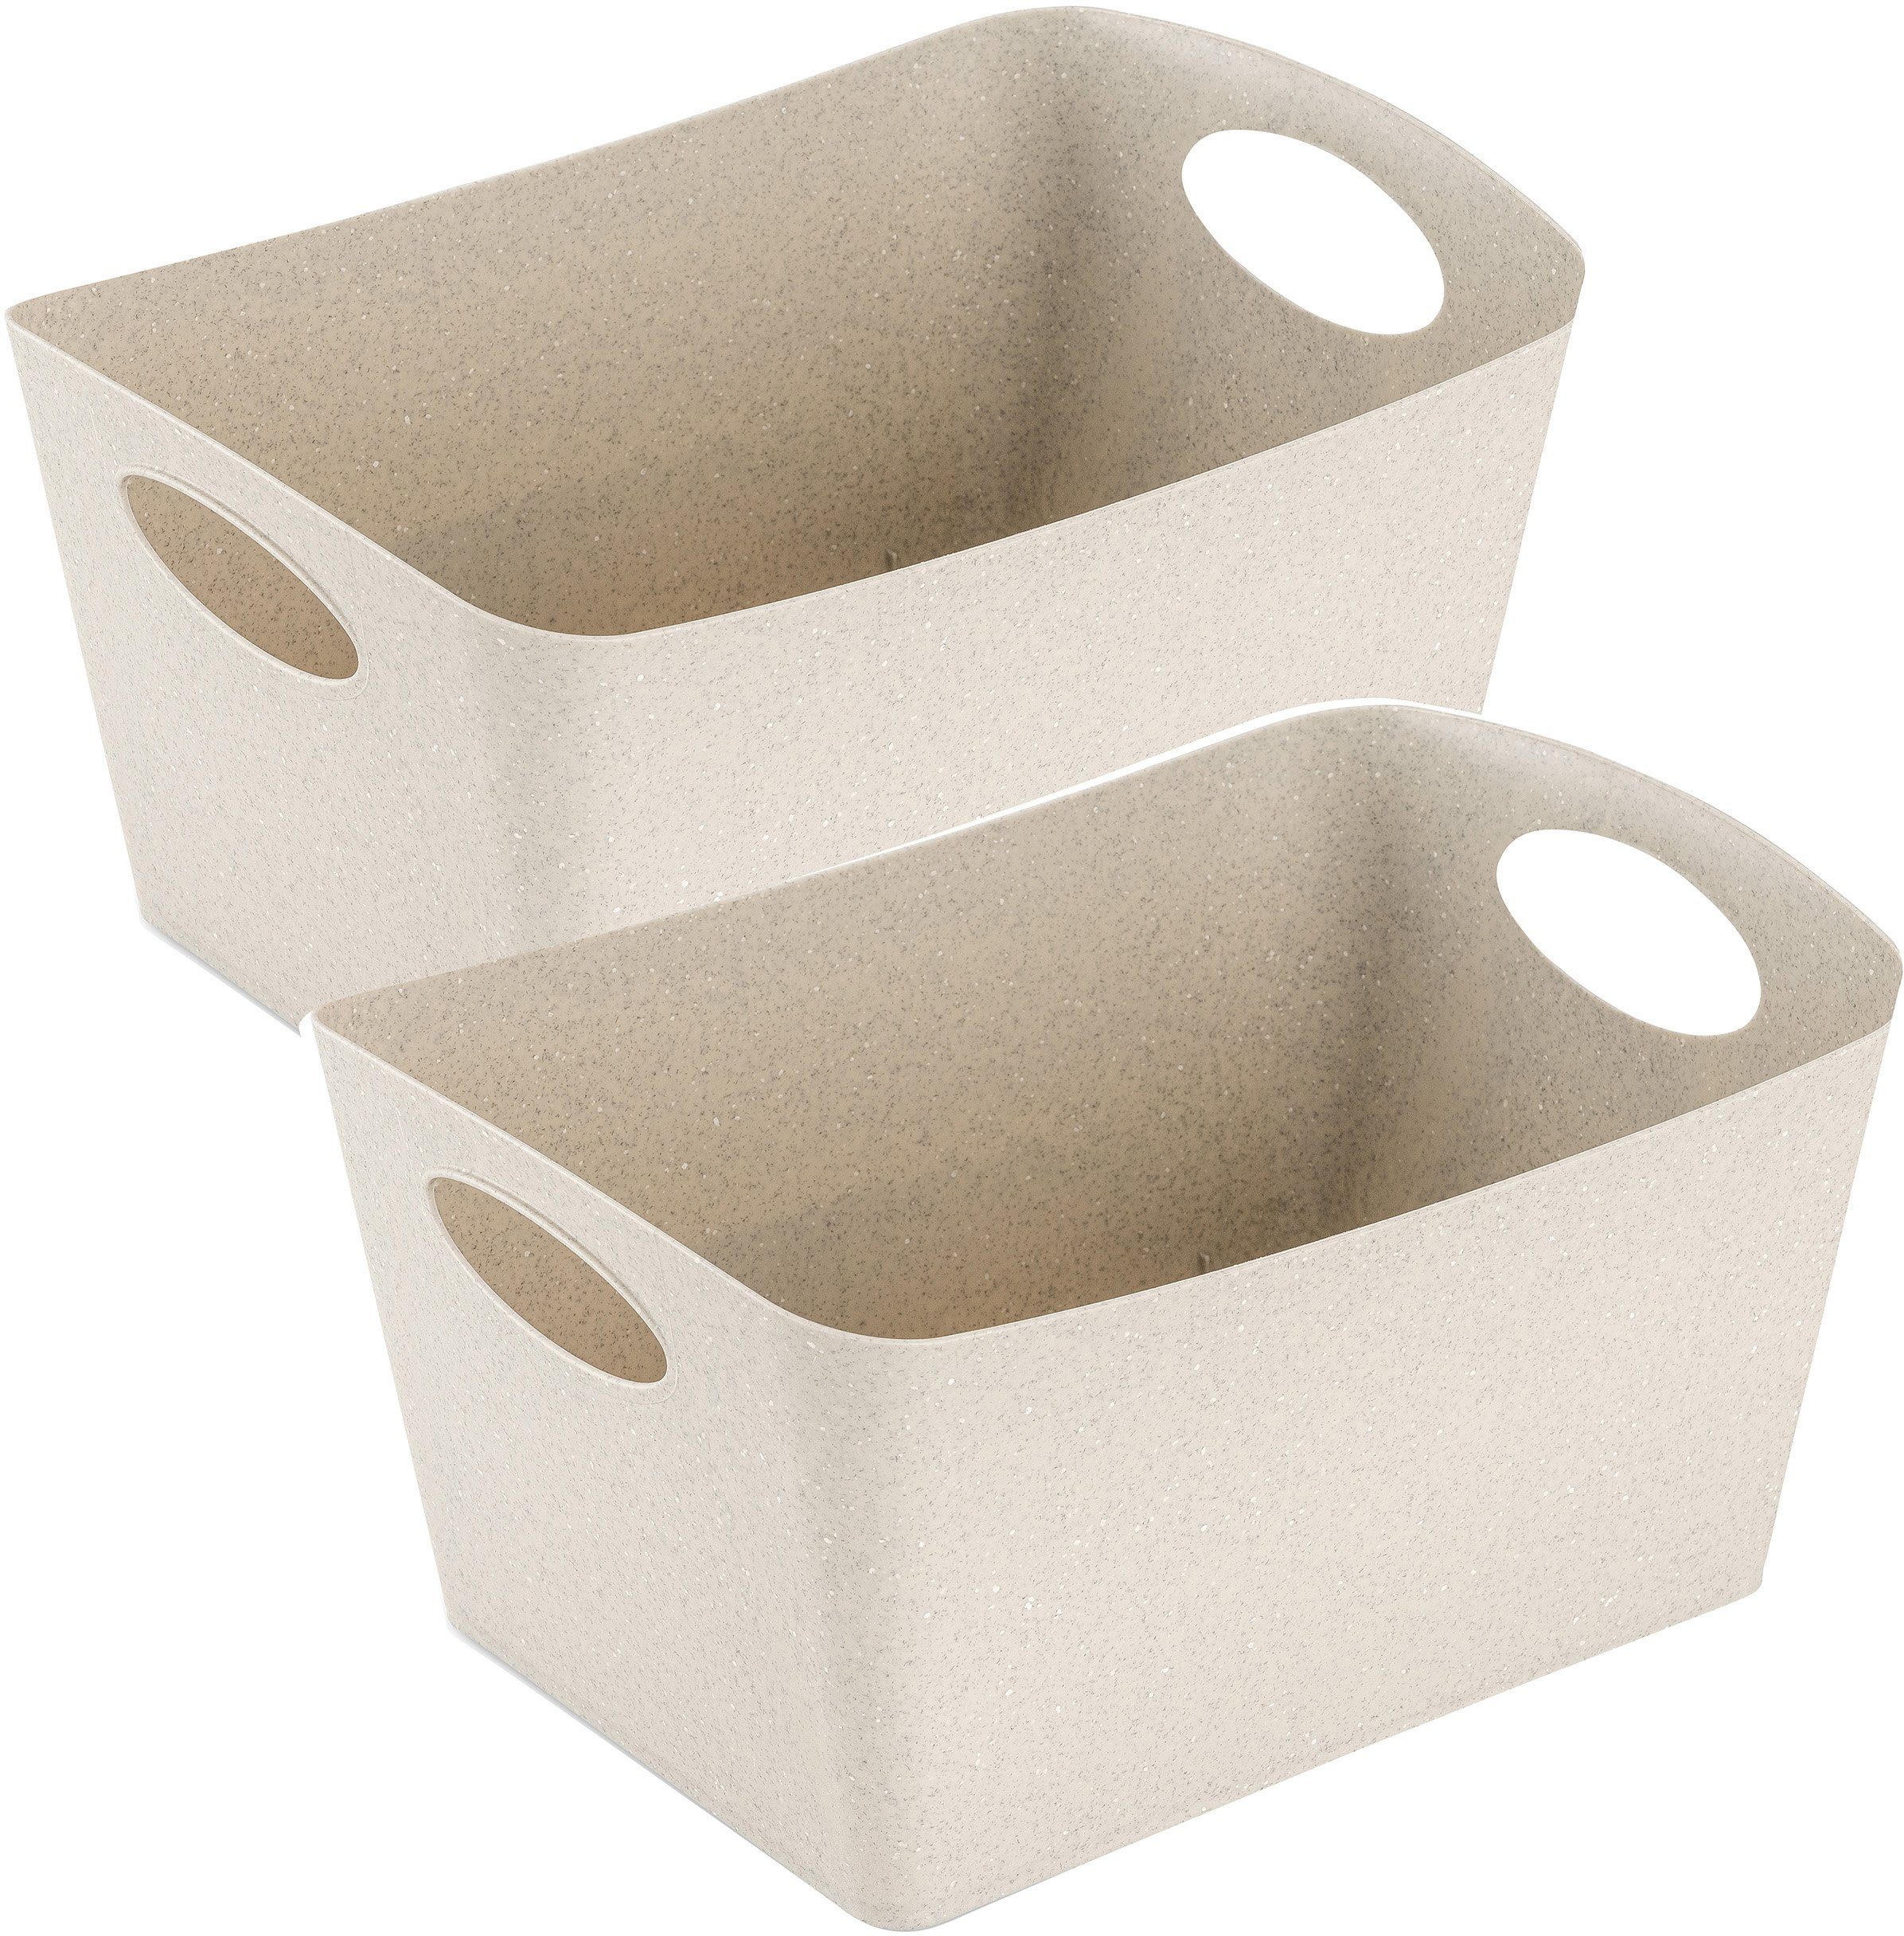 KOZIOL Organizer BOXXX M (Set, 2 St), Aufbewahrungsbox, Made in Germany, 100% recyceltes Material, 3,5 Liter recycled desert sand